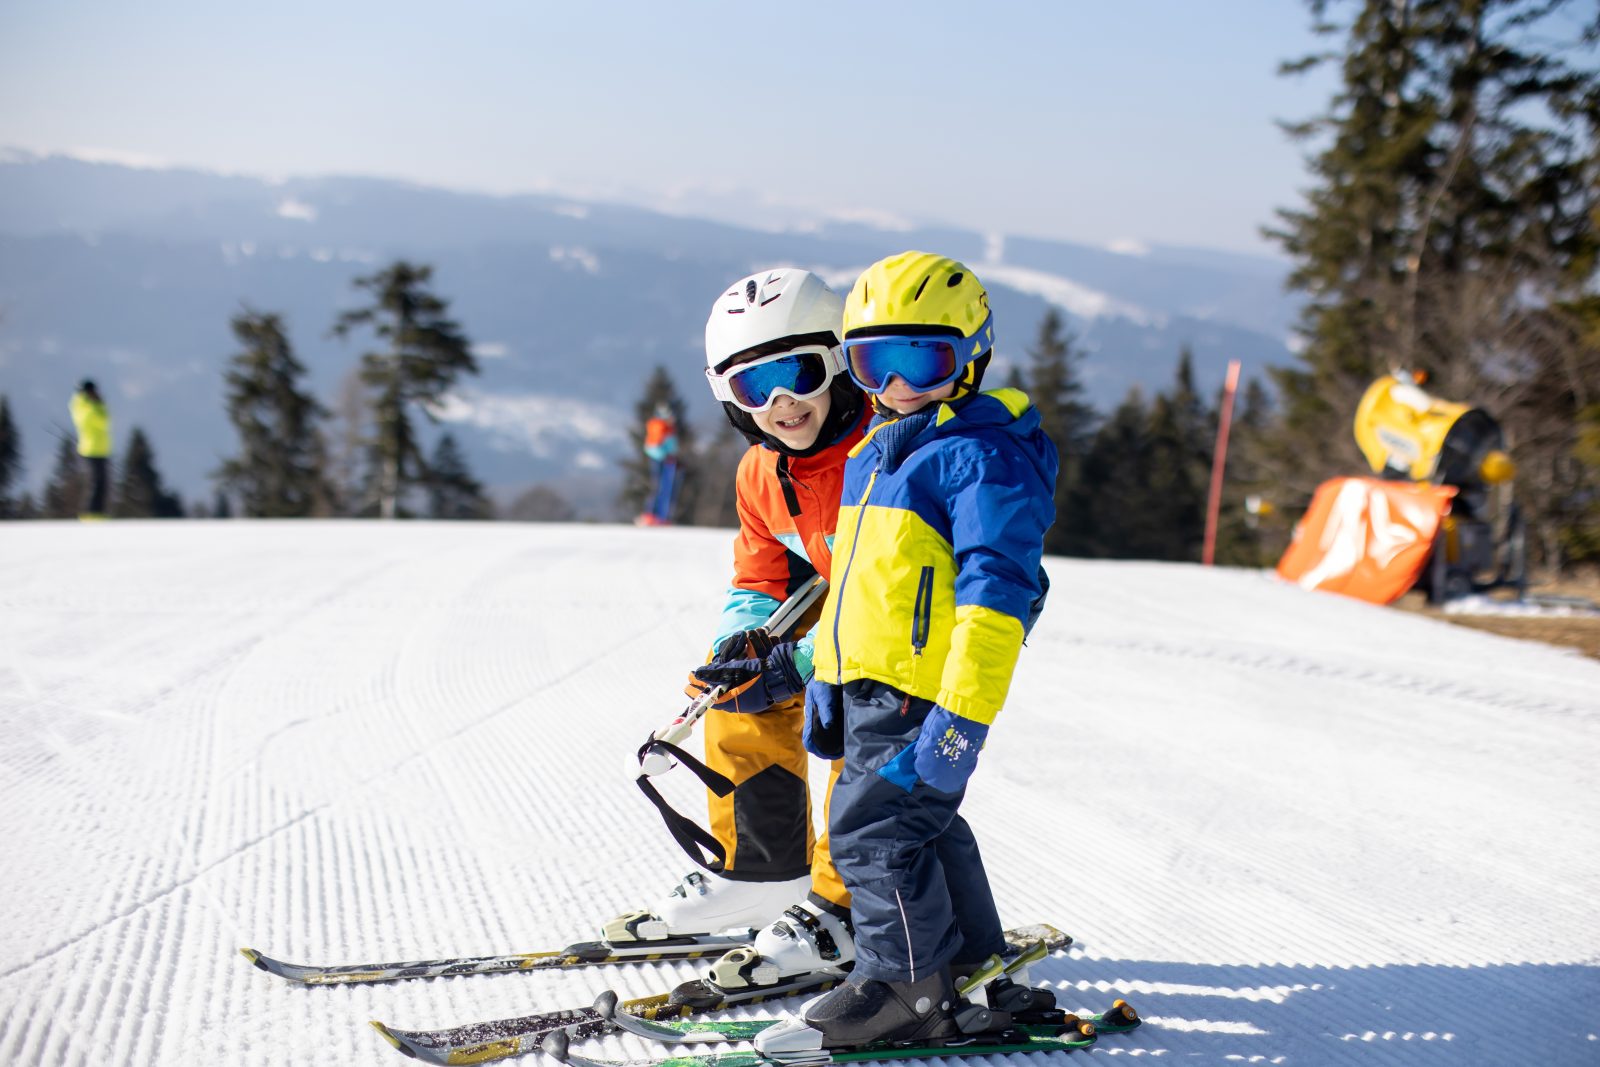 Here’s why we recommend booking your instructors in advance! ⛷